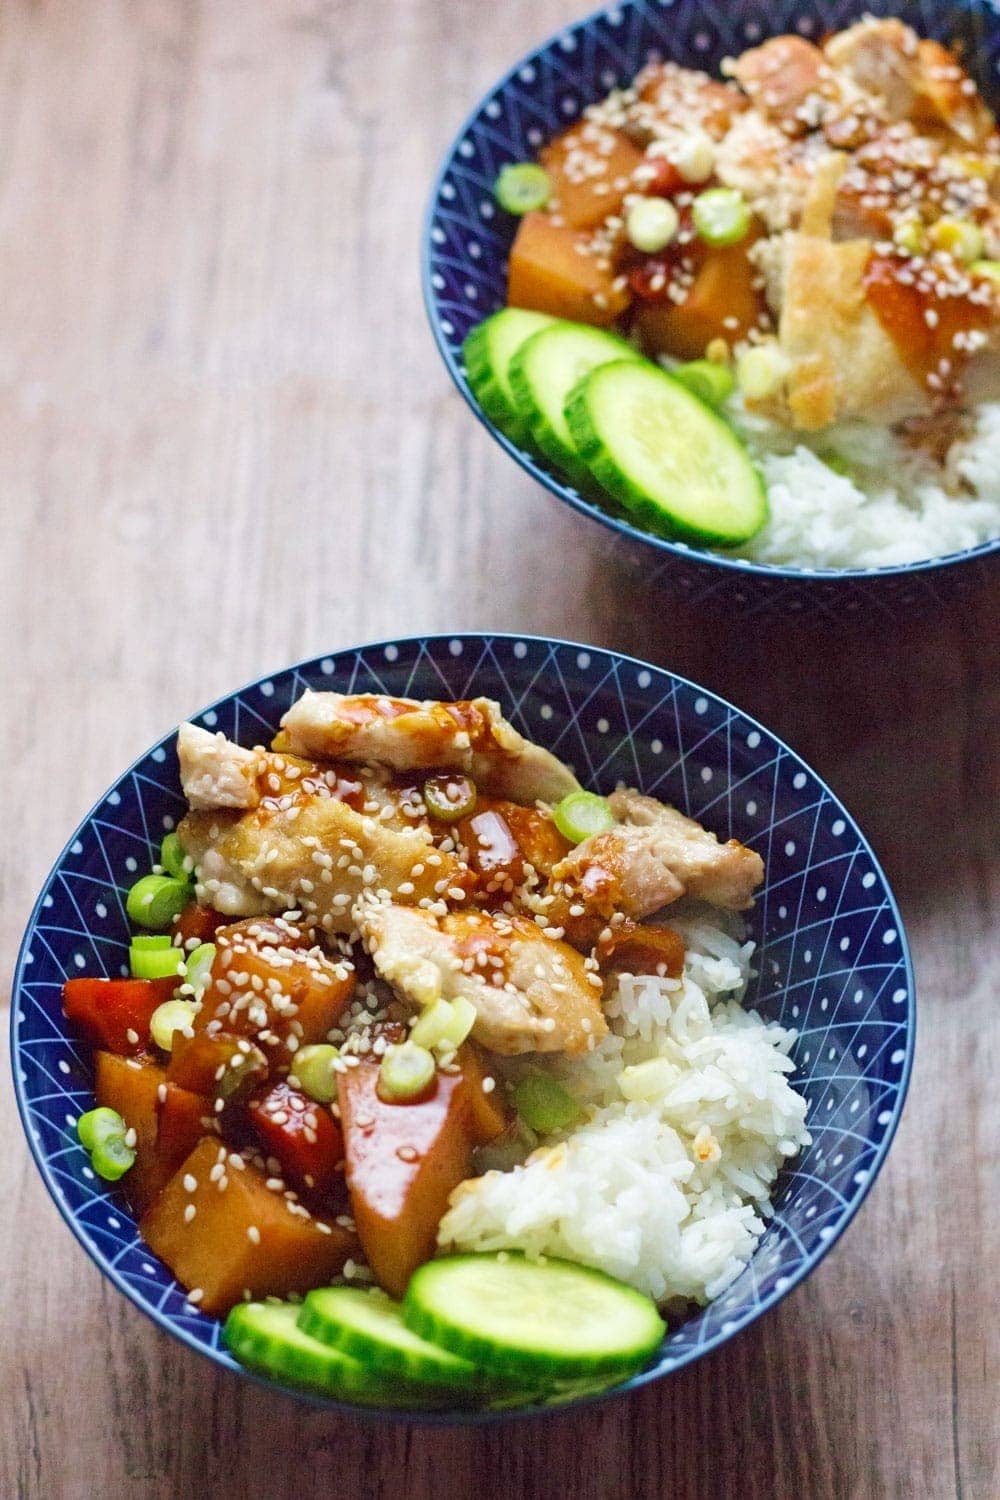 Spicy Korean chicken & potato stew, or dakdoritang, has the perfect balance of sweet and spicy from the use of gochujang and sugar in the broth.